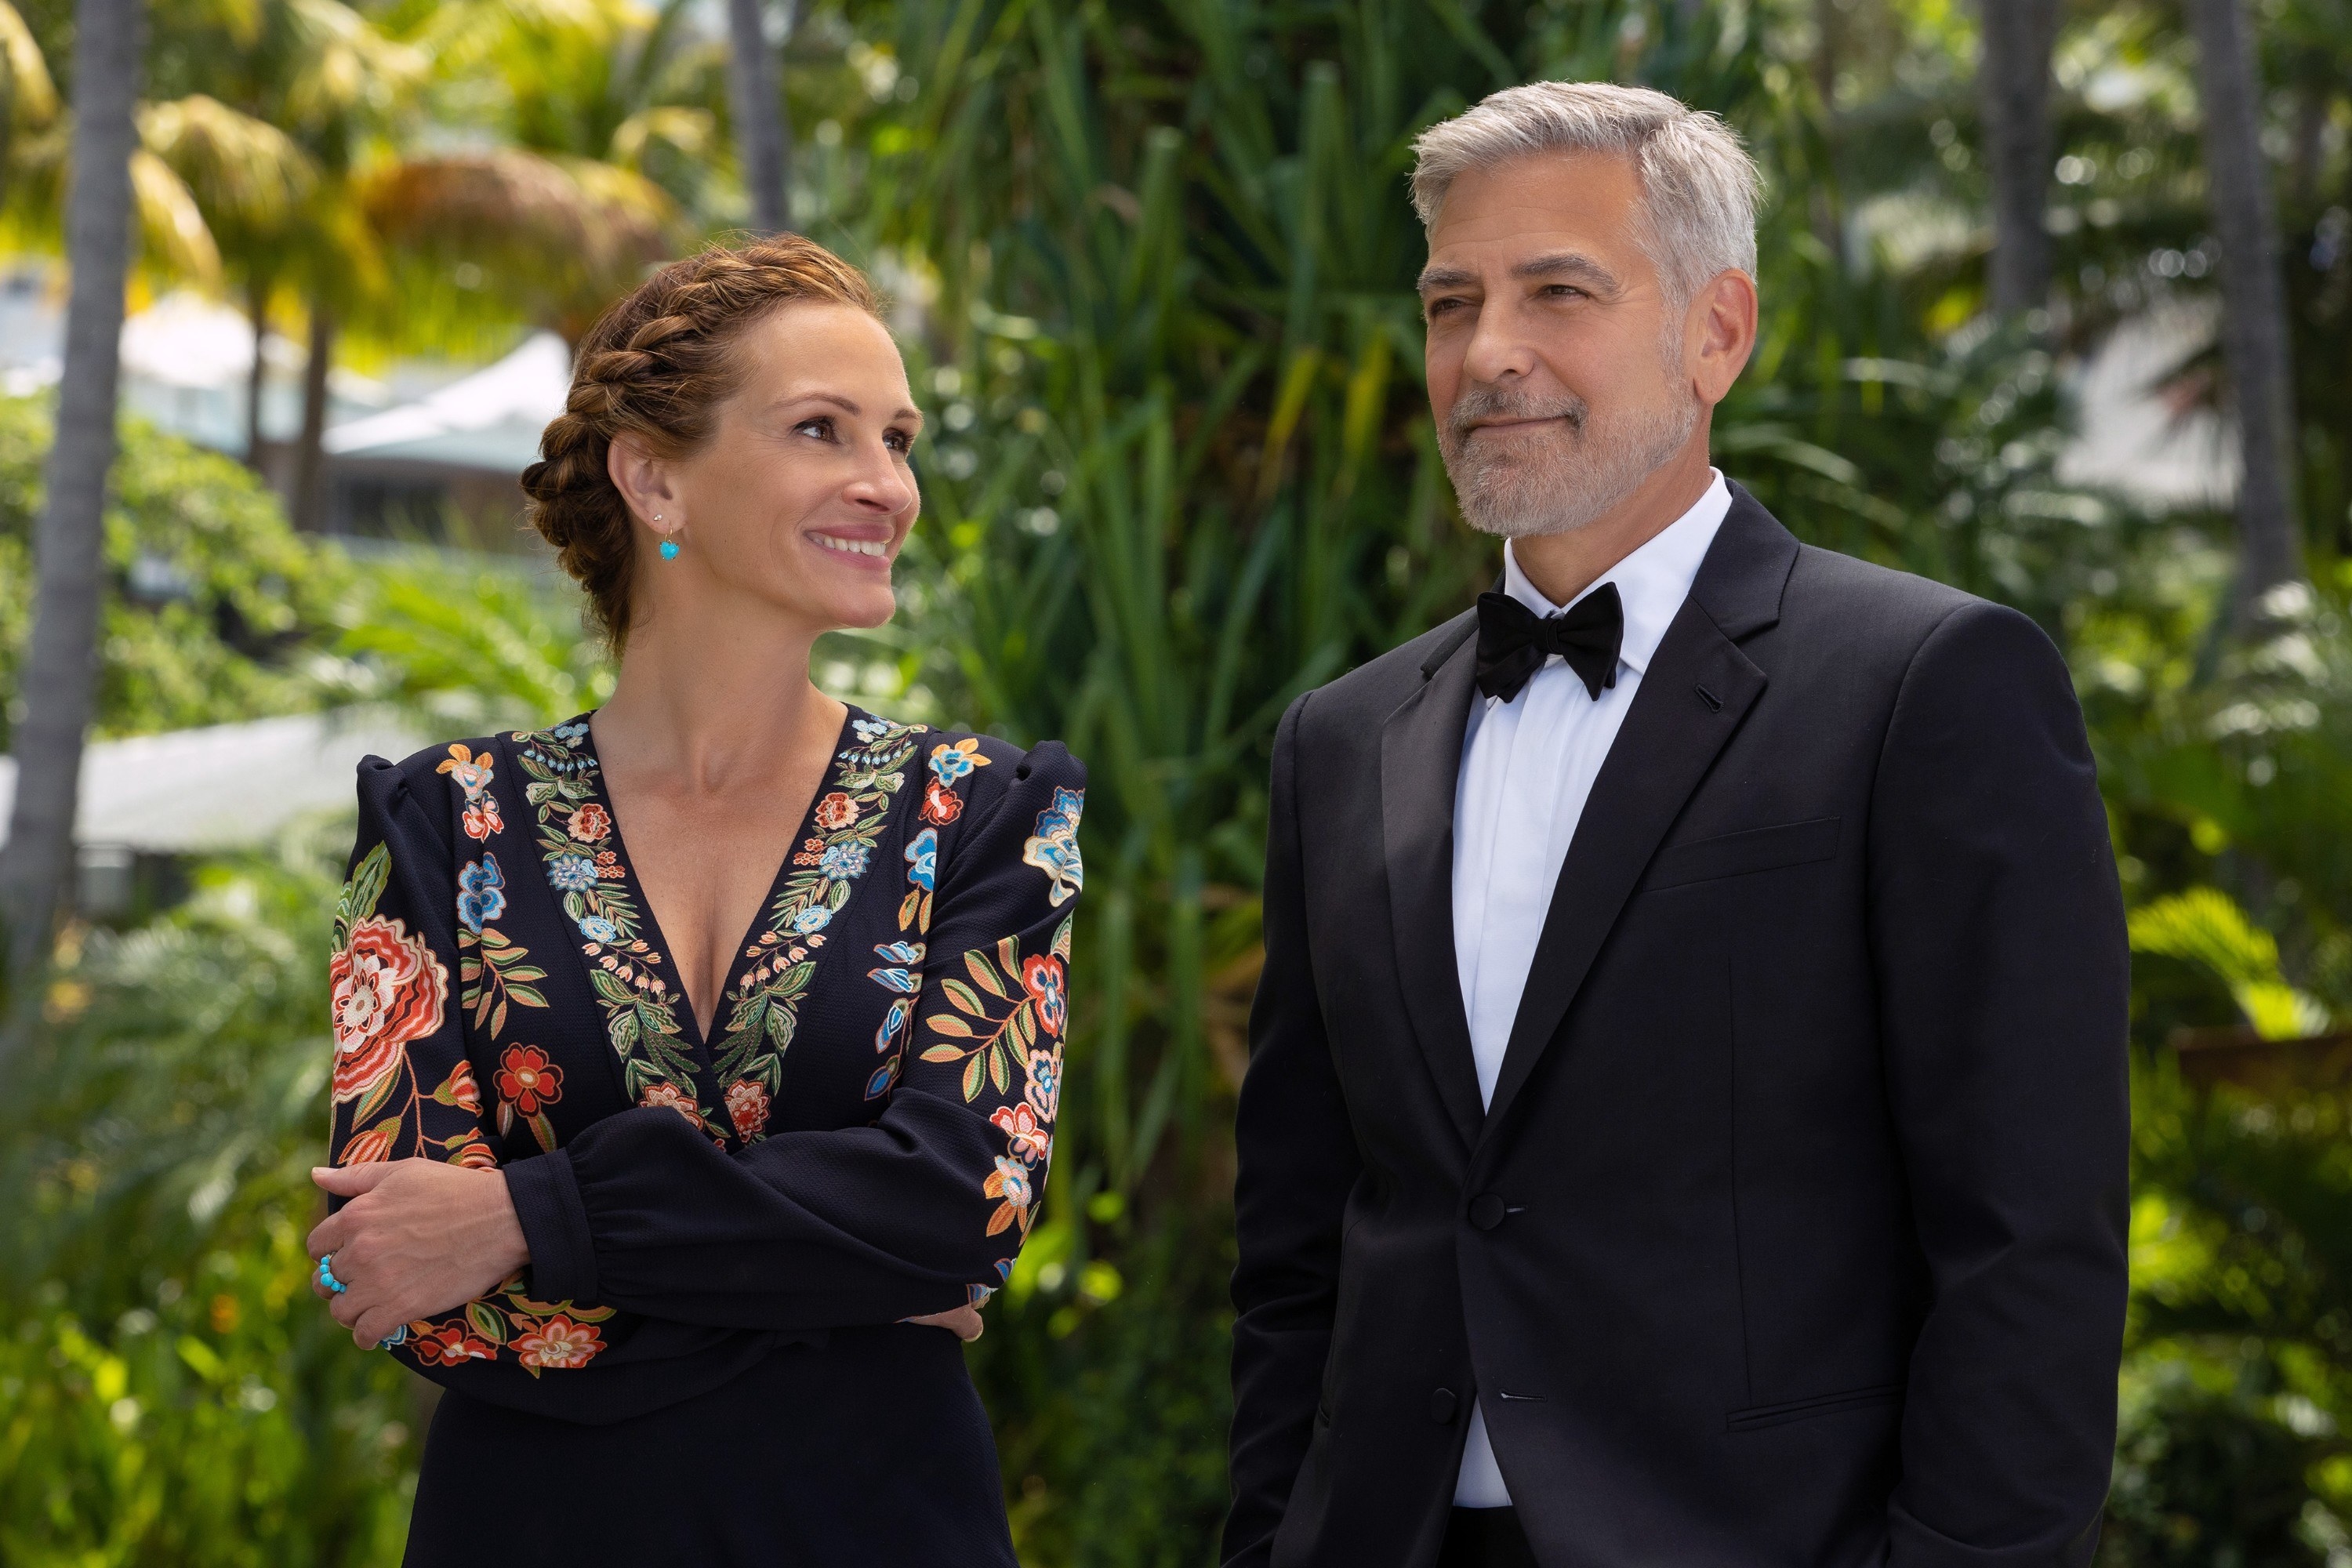 Julia Roberts and George Clooney stand at a tropical wedding